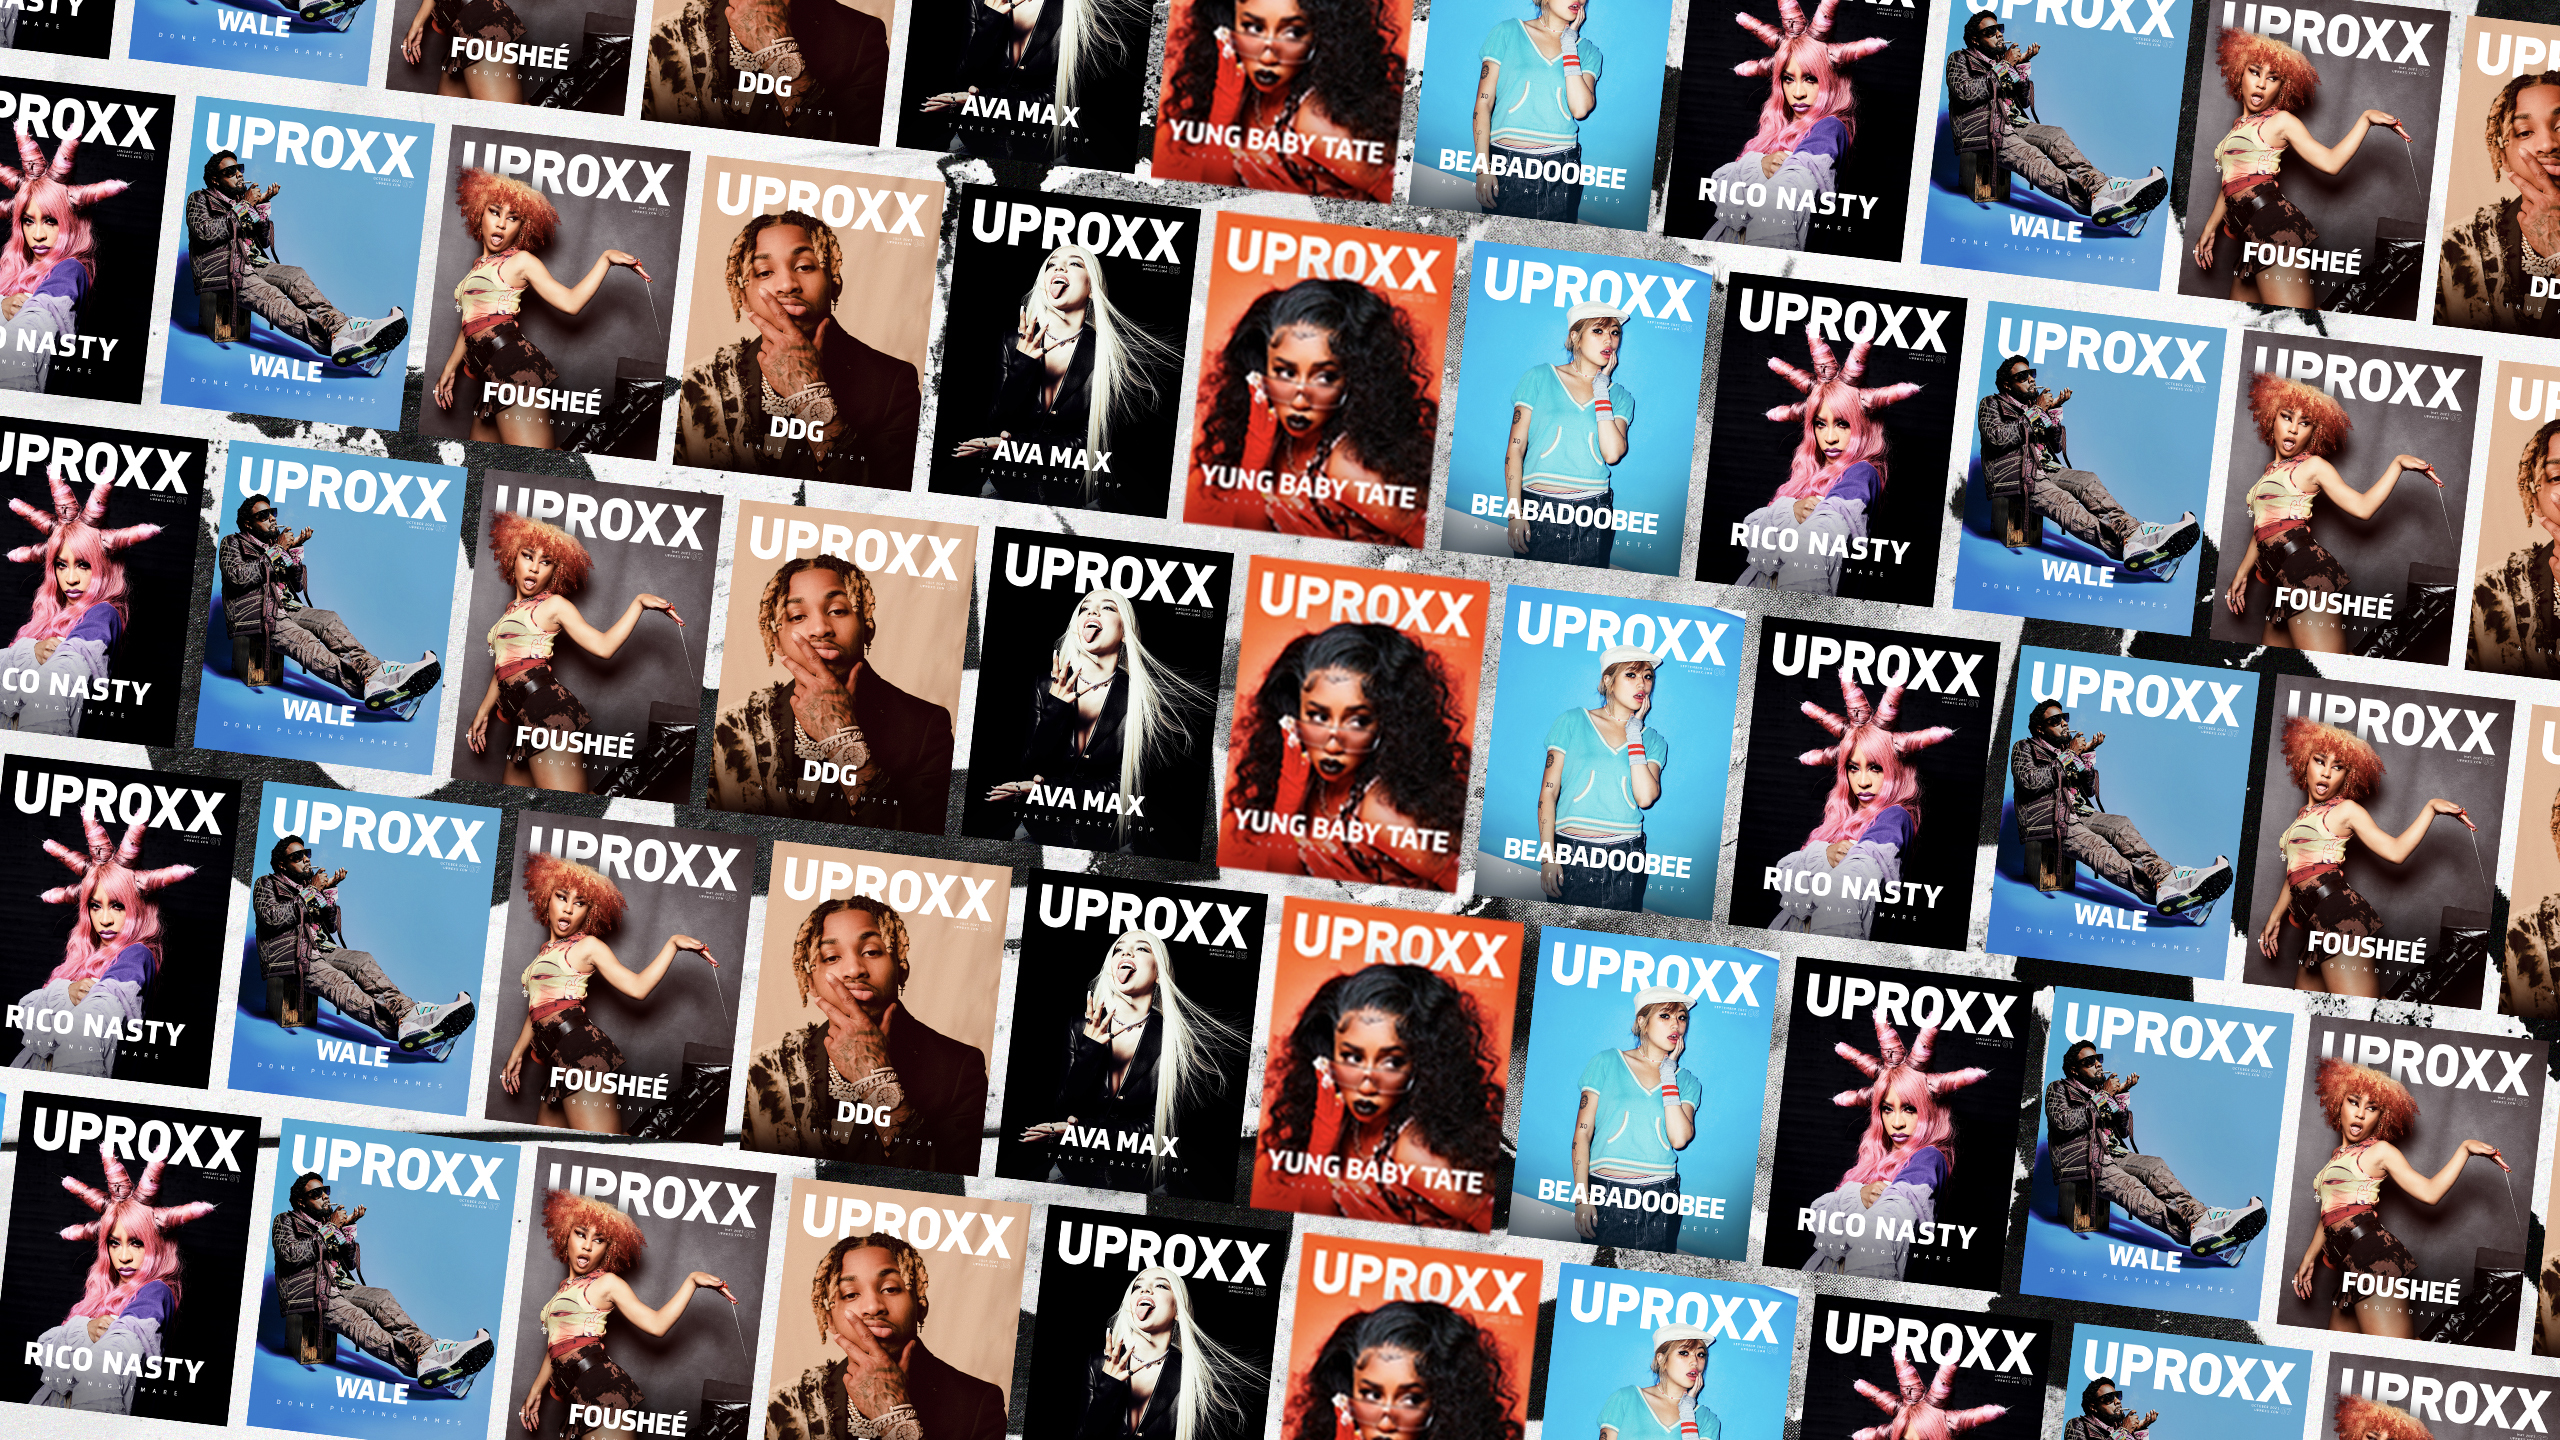 Cover image for  article: WMX's Music and Culture Destination, UPROXX, Predicts Changes Up Ahead for Music and Media